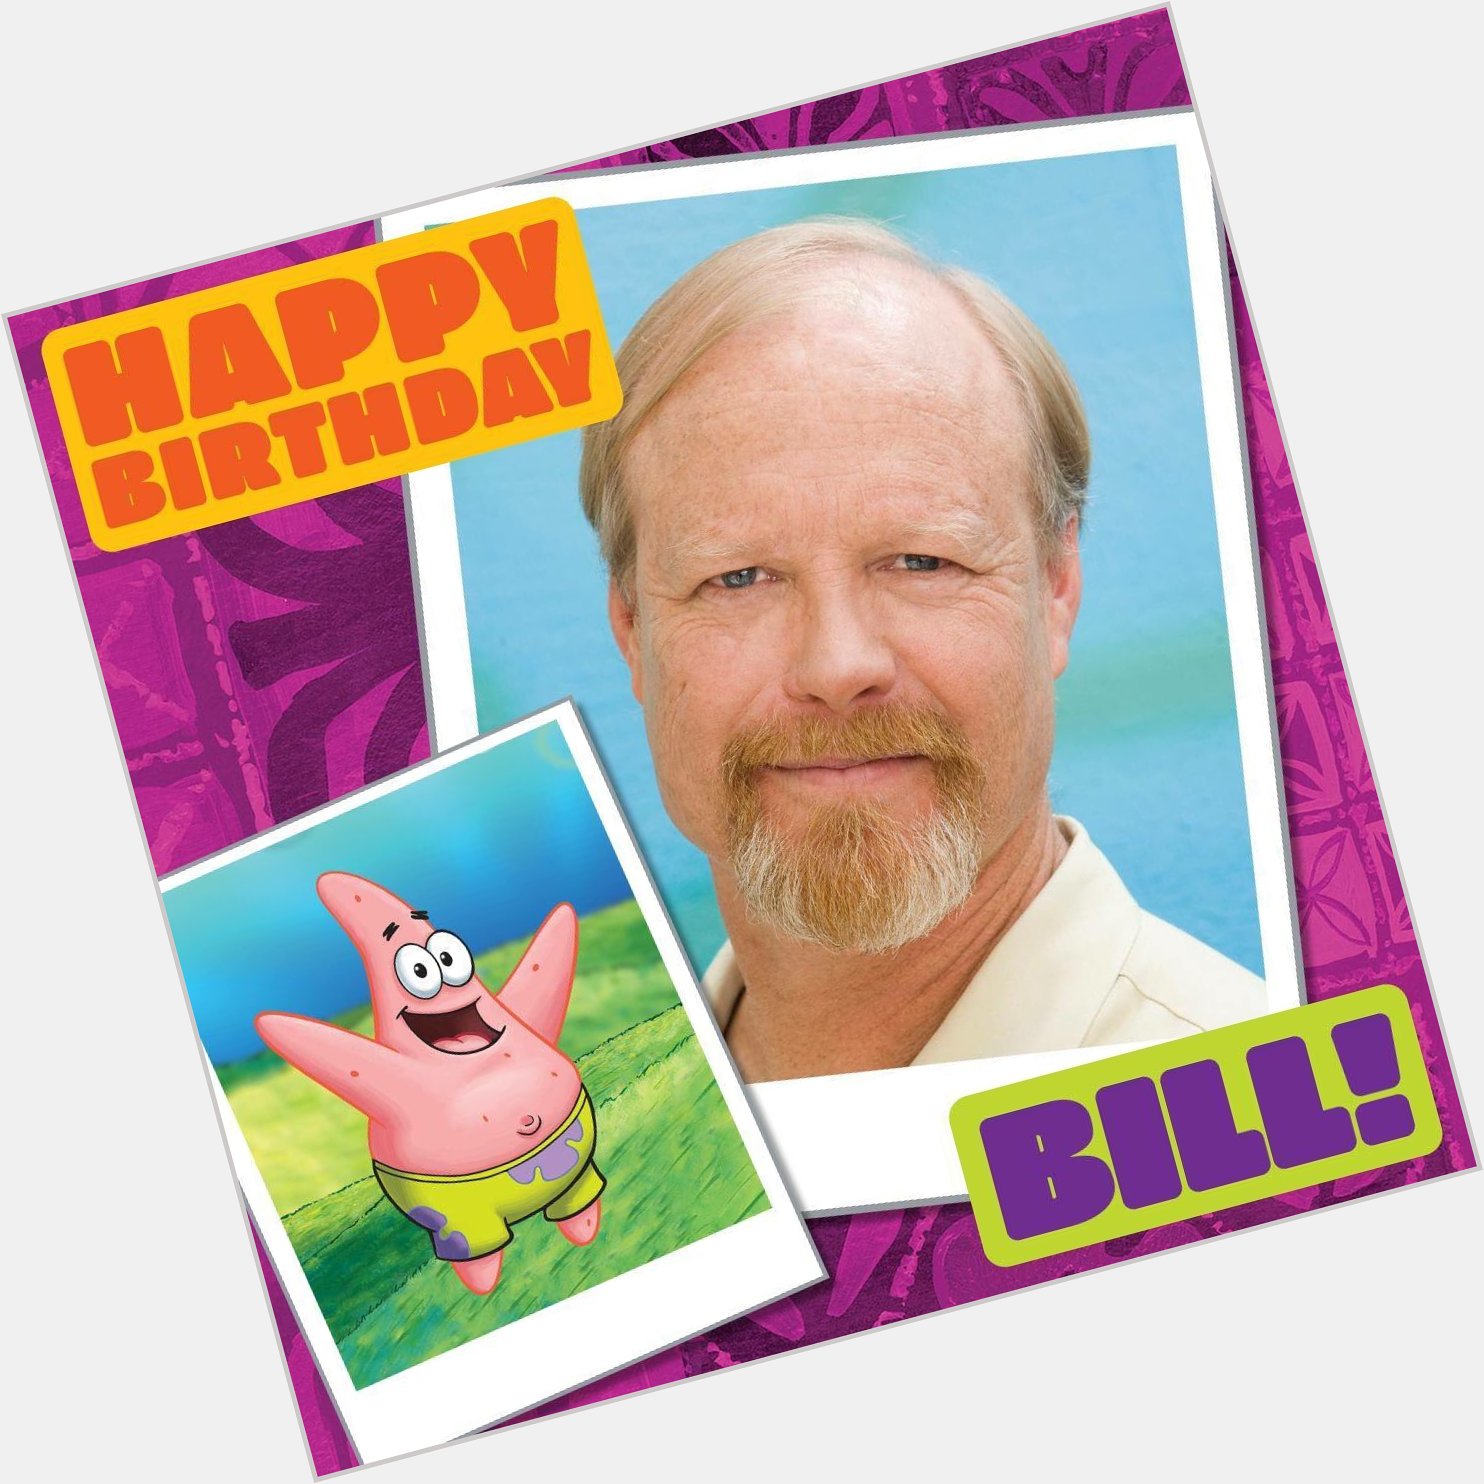 Happy birthday to Bill Fagerbakke, the Voice of Patrick Star.  